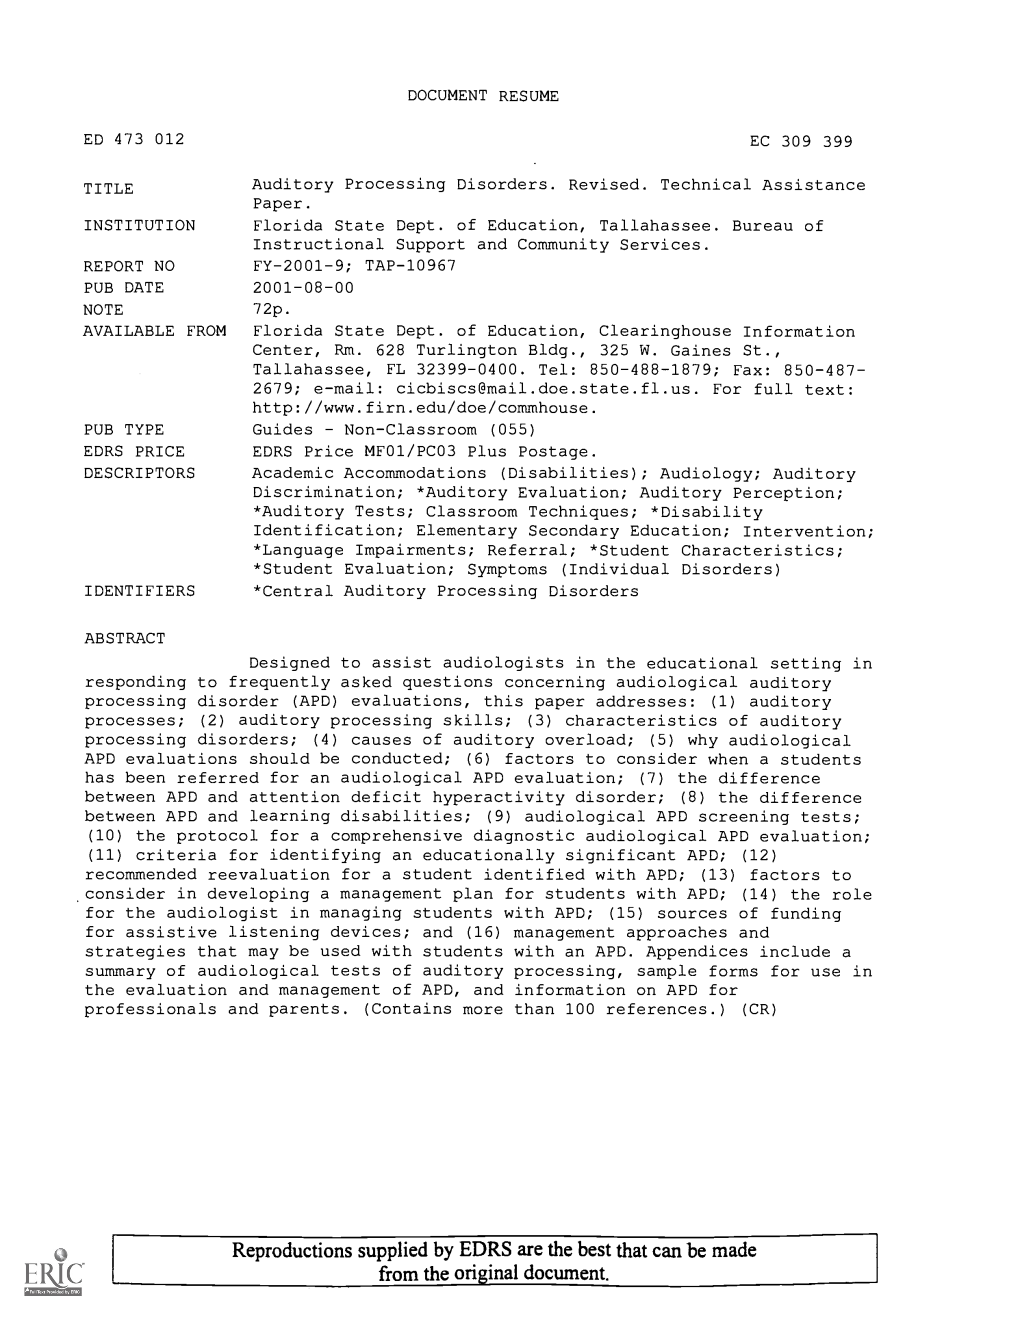 Auditory Processing Disorders. Revised. Technical Assistance Paper